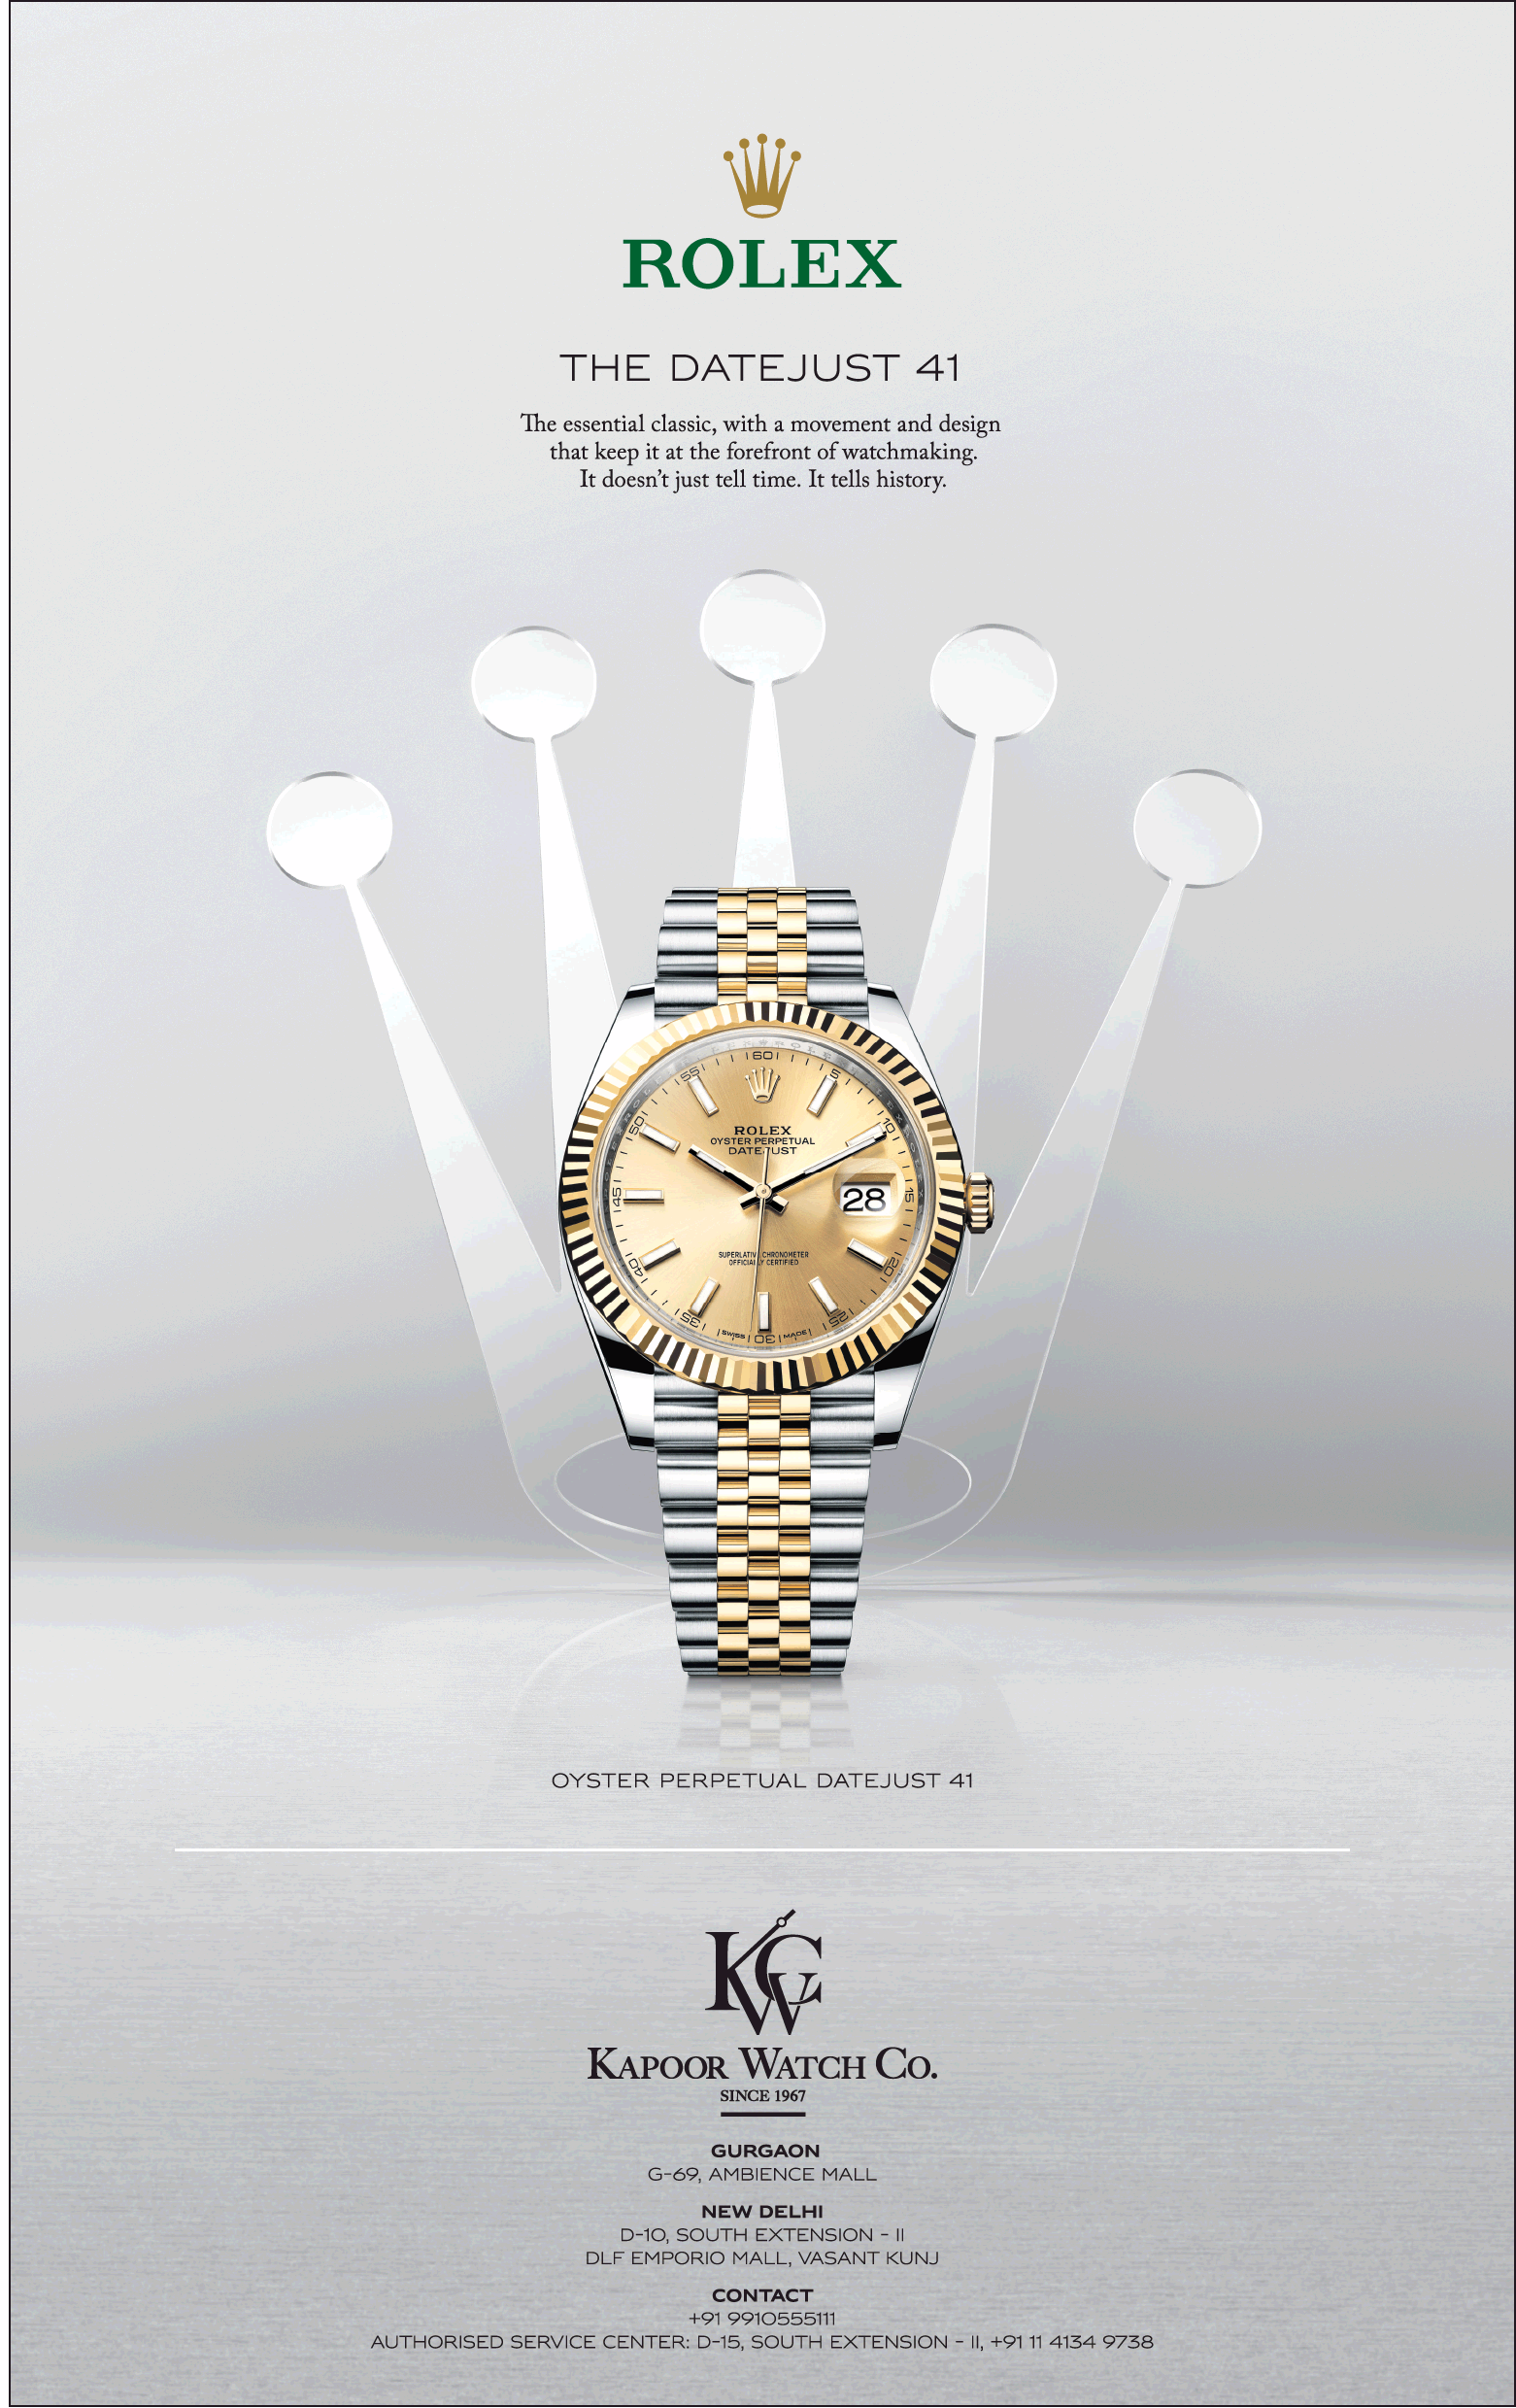 Kapoor Watch Co Rolex The Datejust 41 Ad Advert Gallery